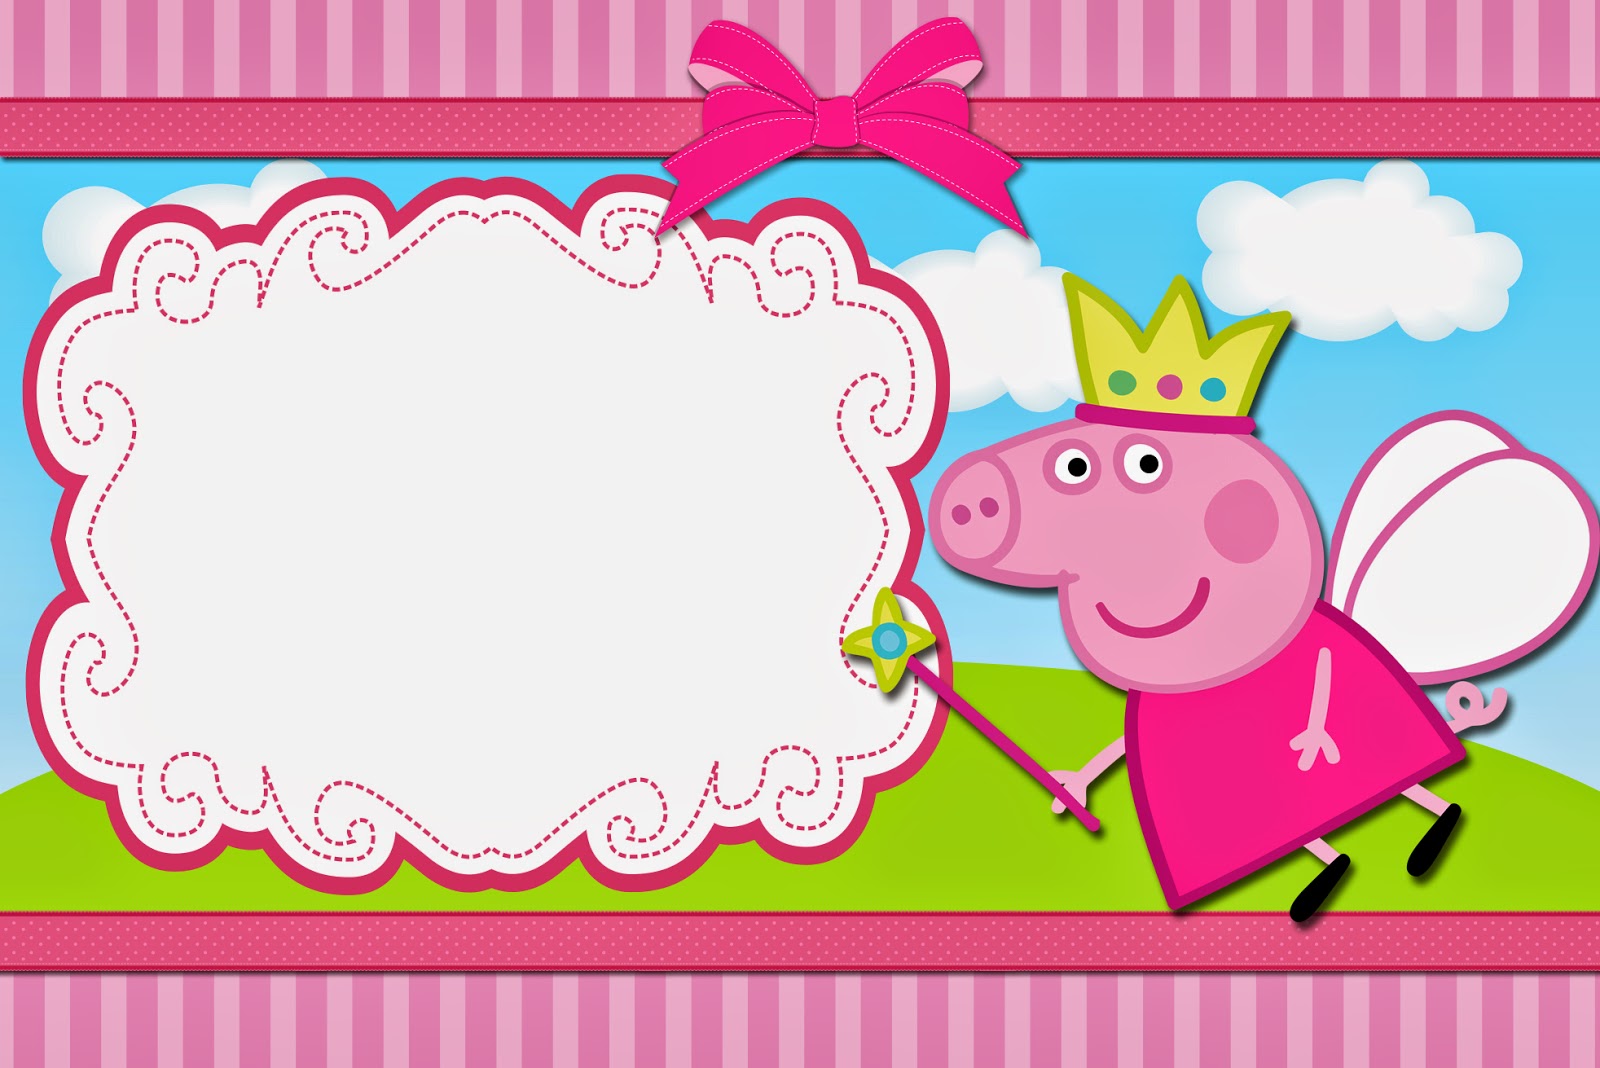 Free Download Peppa Pig Fairy Printable Invitations Labels Or Cards Peppa 1600x1068 For Your Desktop Mobile Tablet Explore 49 Free Peppa Pig Wallpaper Pig Desktop Wallpaper Free Pig Wallpaper - roblox birthday invitations roblox invitation te invito a